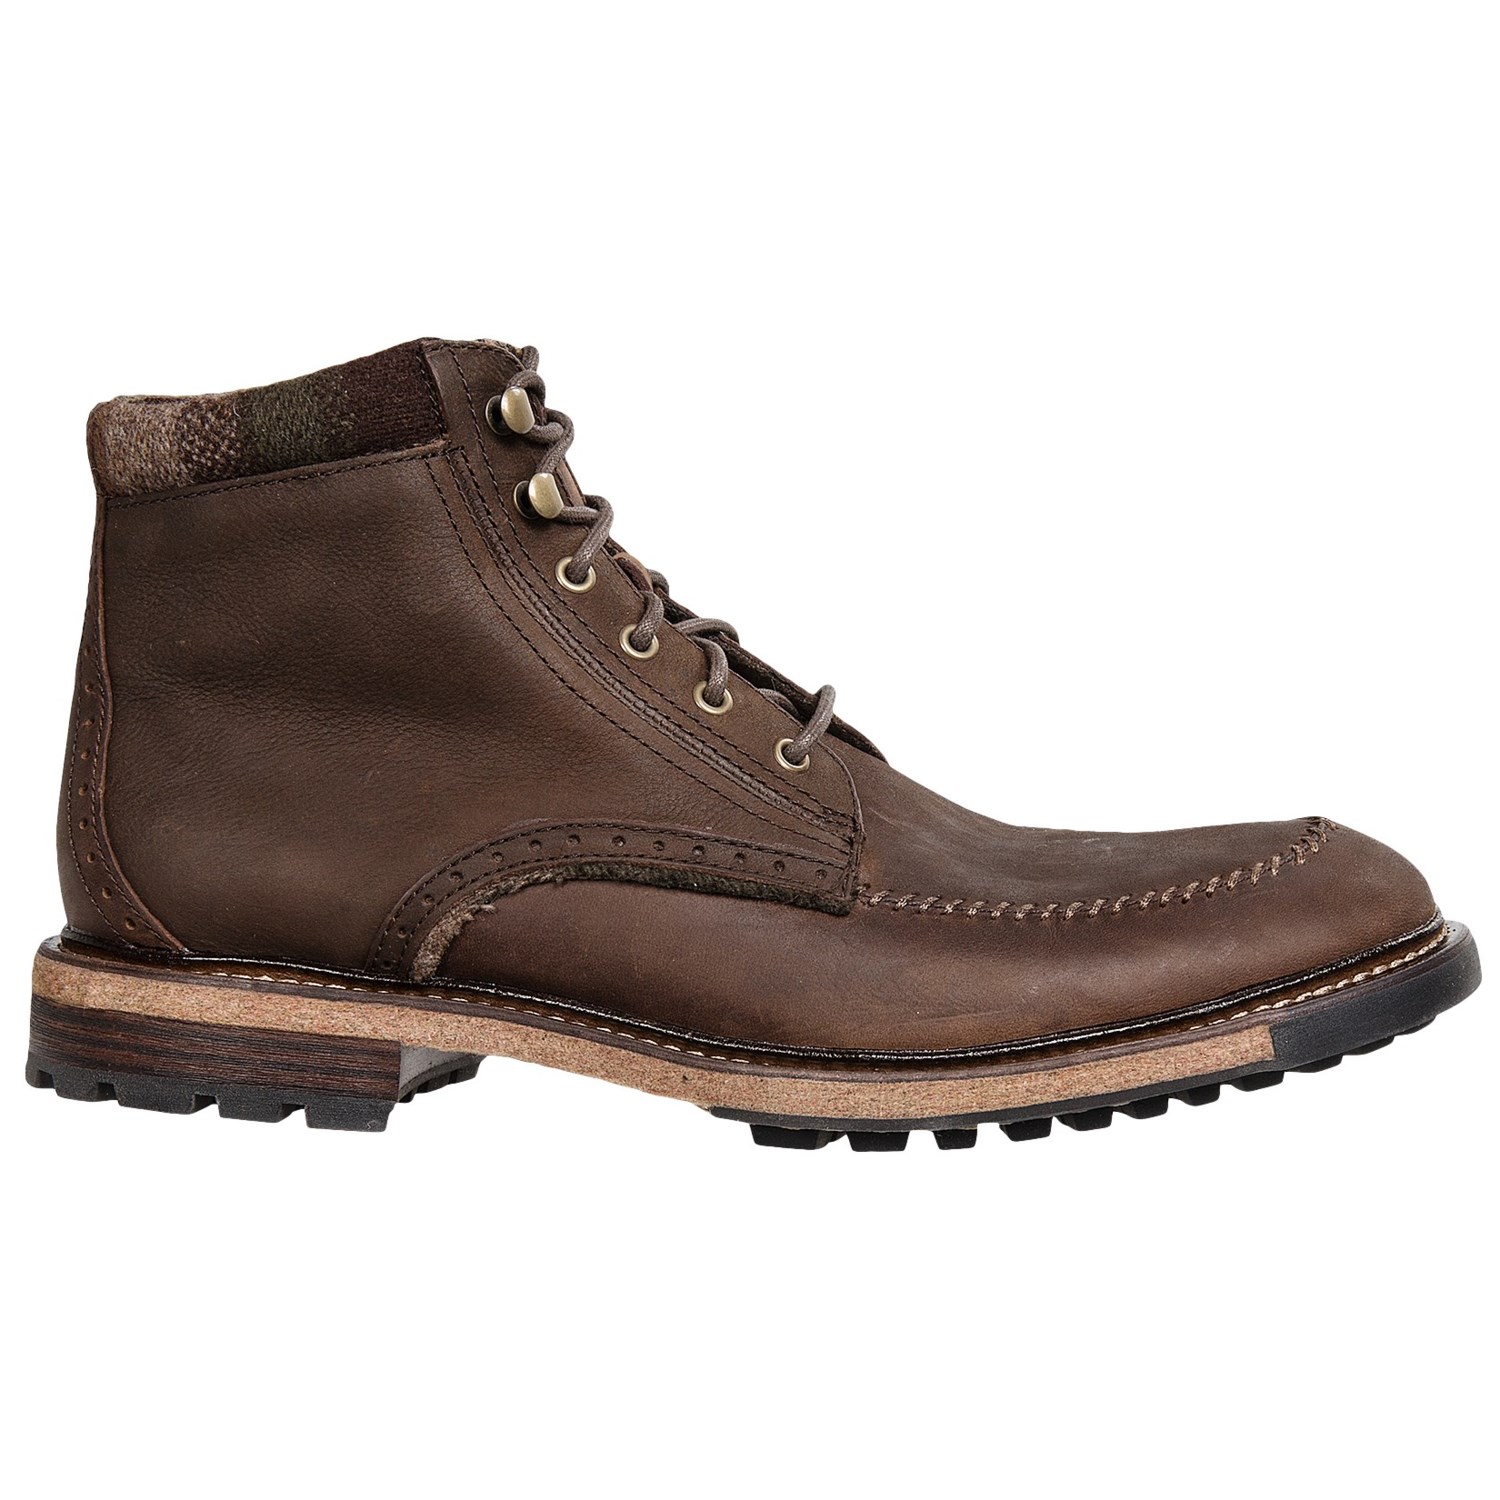 Woolrich Woodwright Leather Boots (For Men)